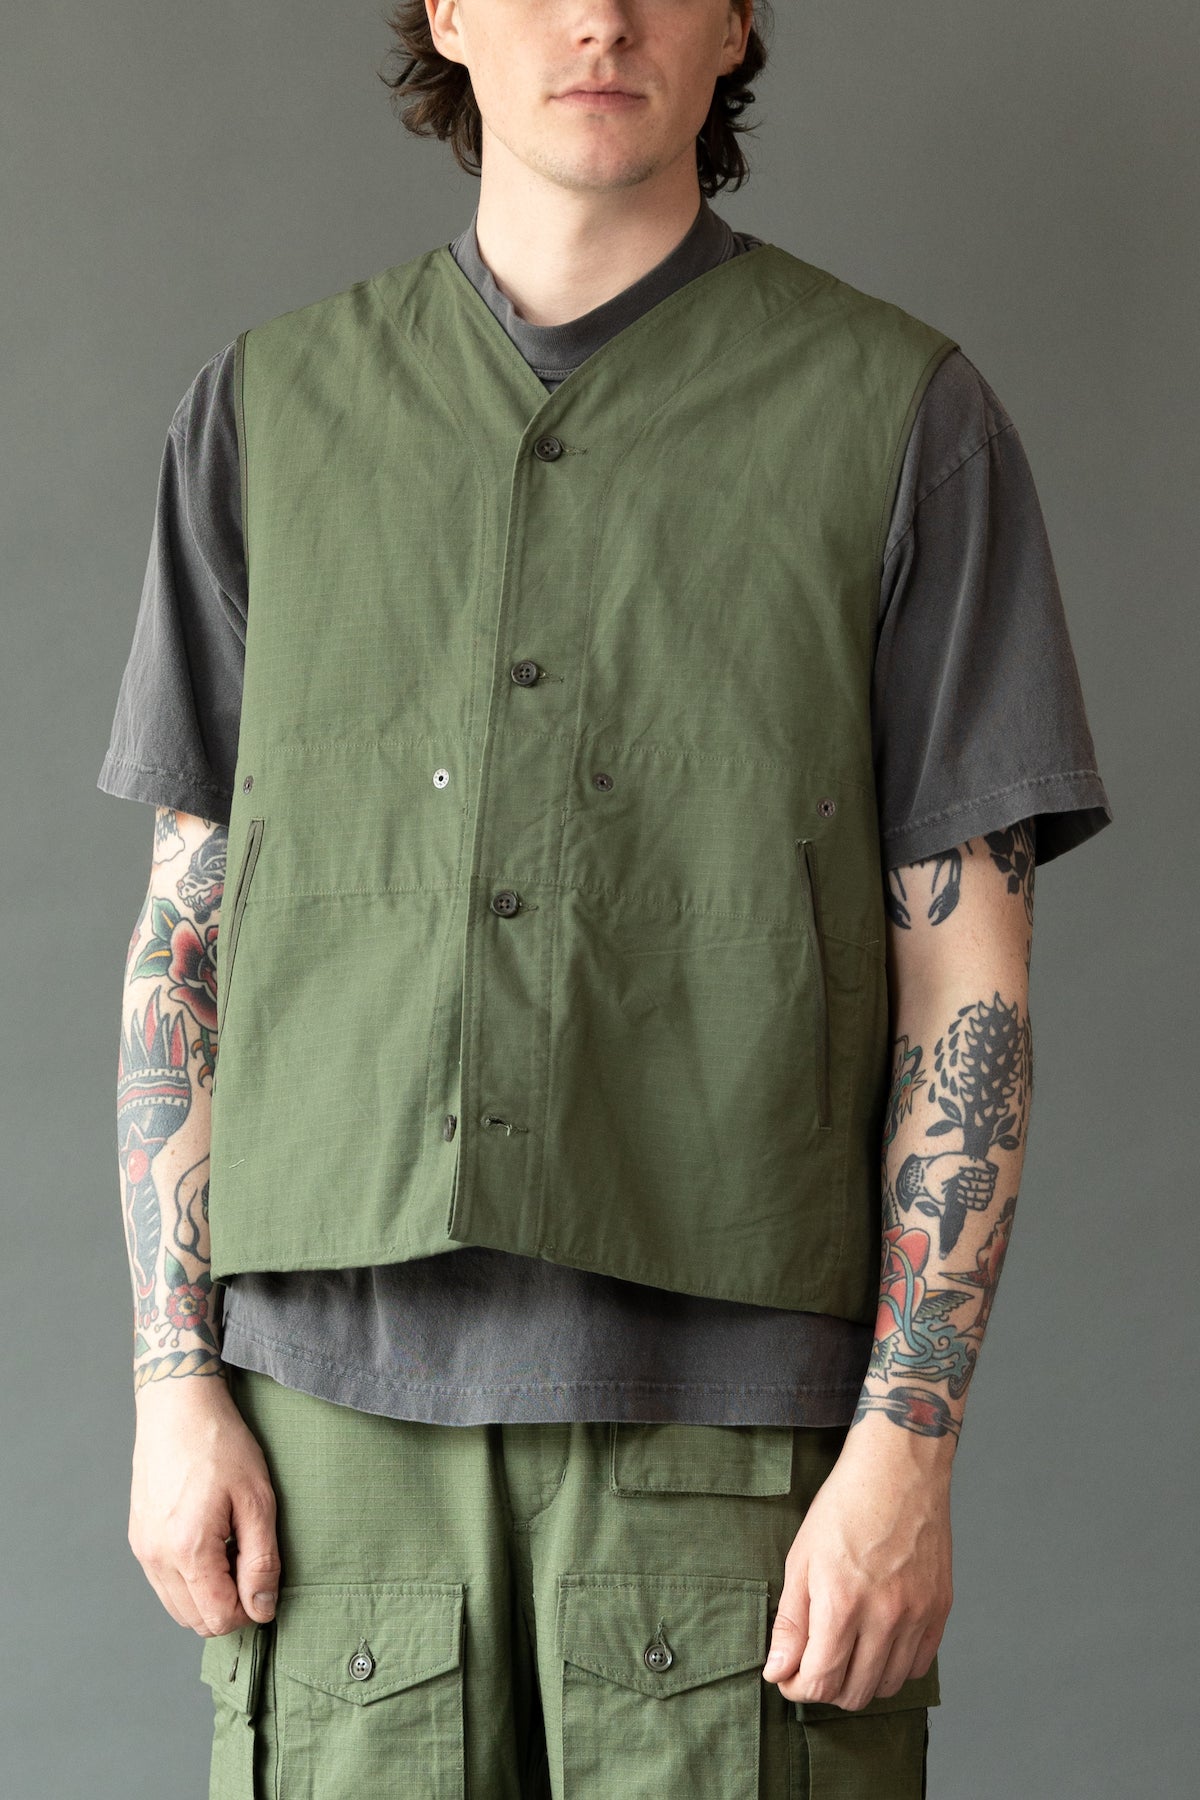 Engineered Garments Liner Vest | Olive Cotton Ripstop | Canoe Club